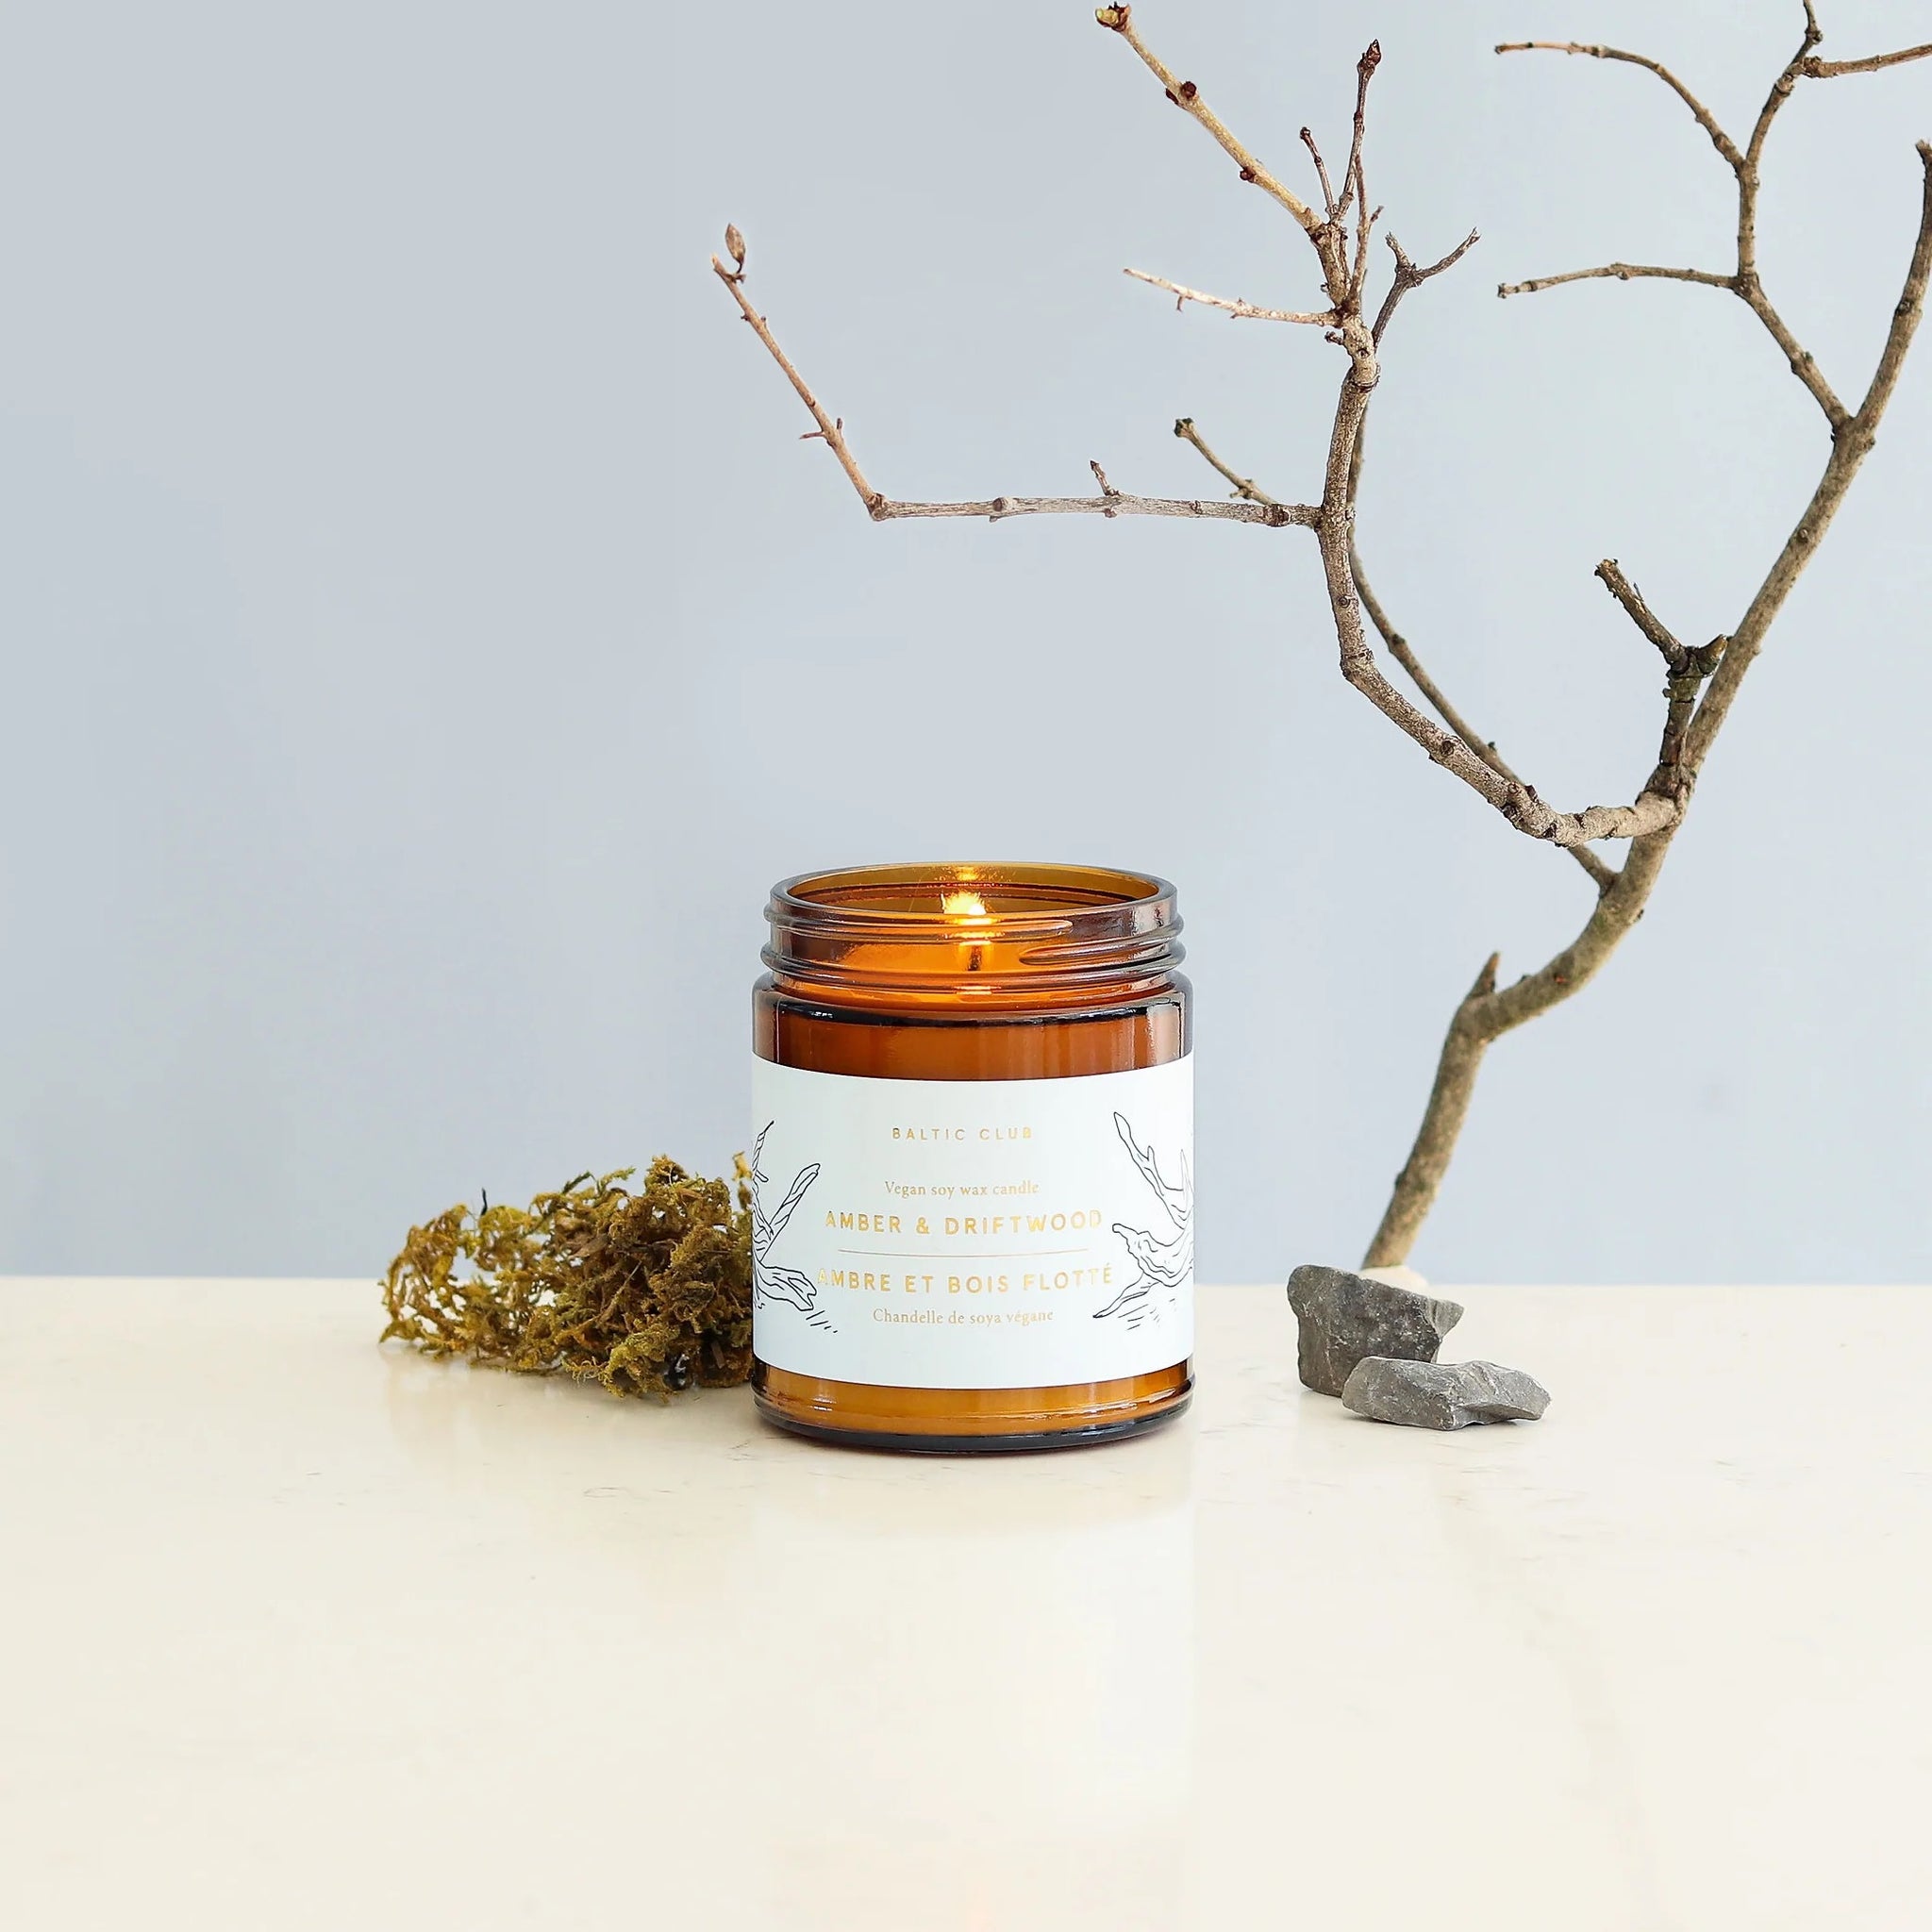 Baltic Club Amber & Driftwood Soy Candle